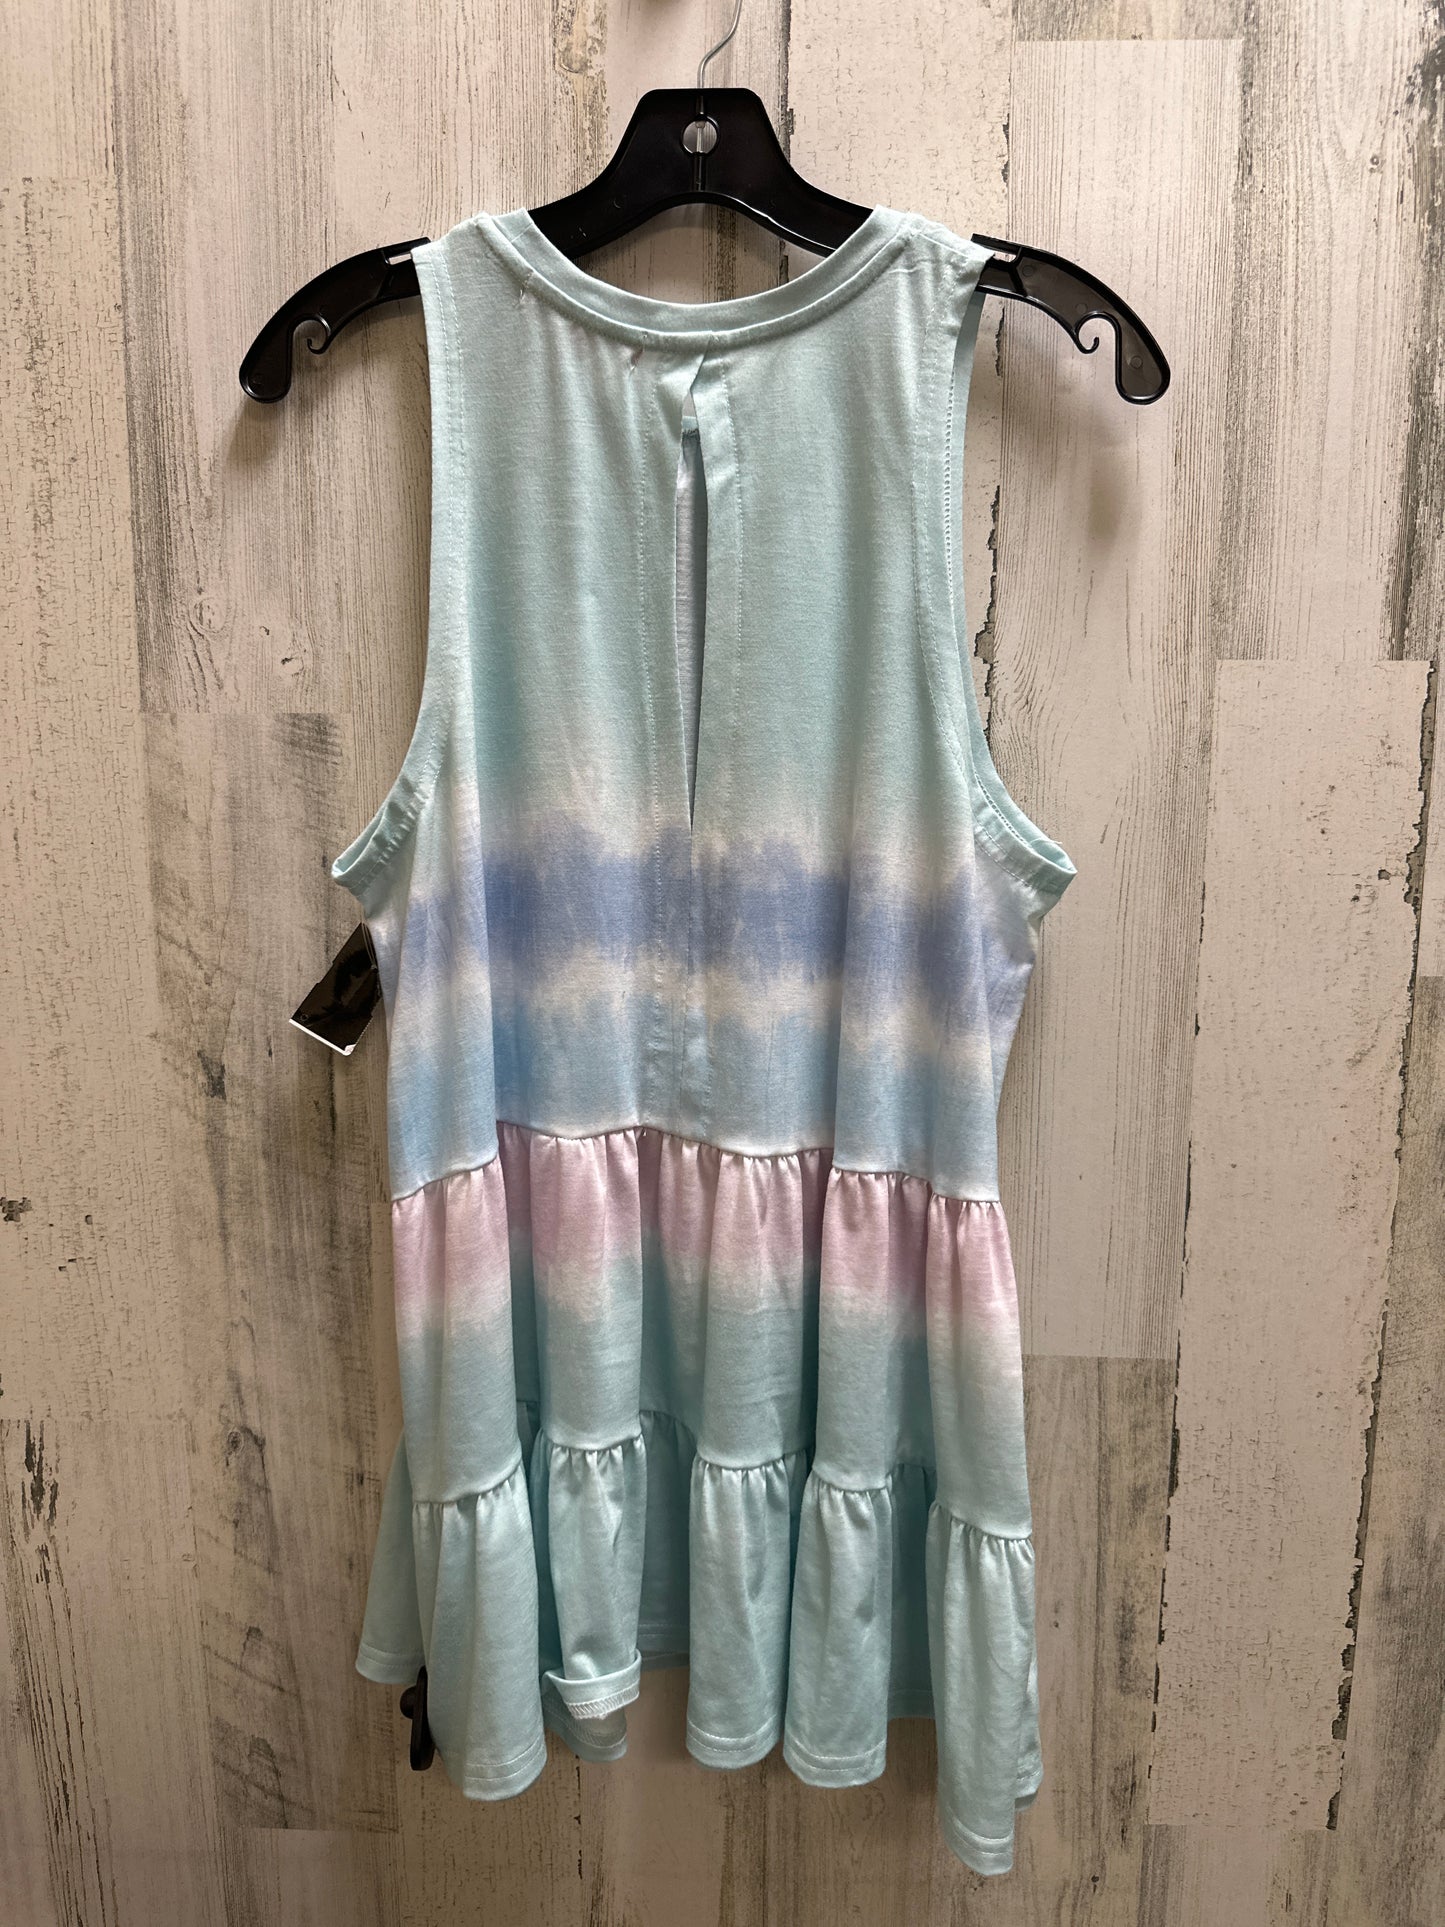 Blue Top Sleeveless Simply Southern, Size L